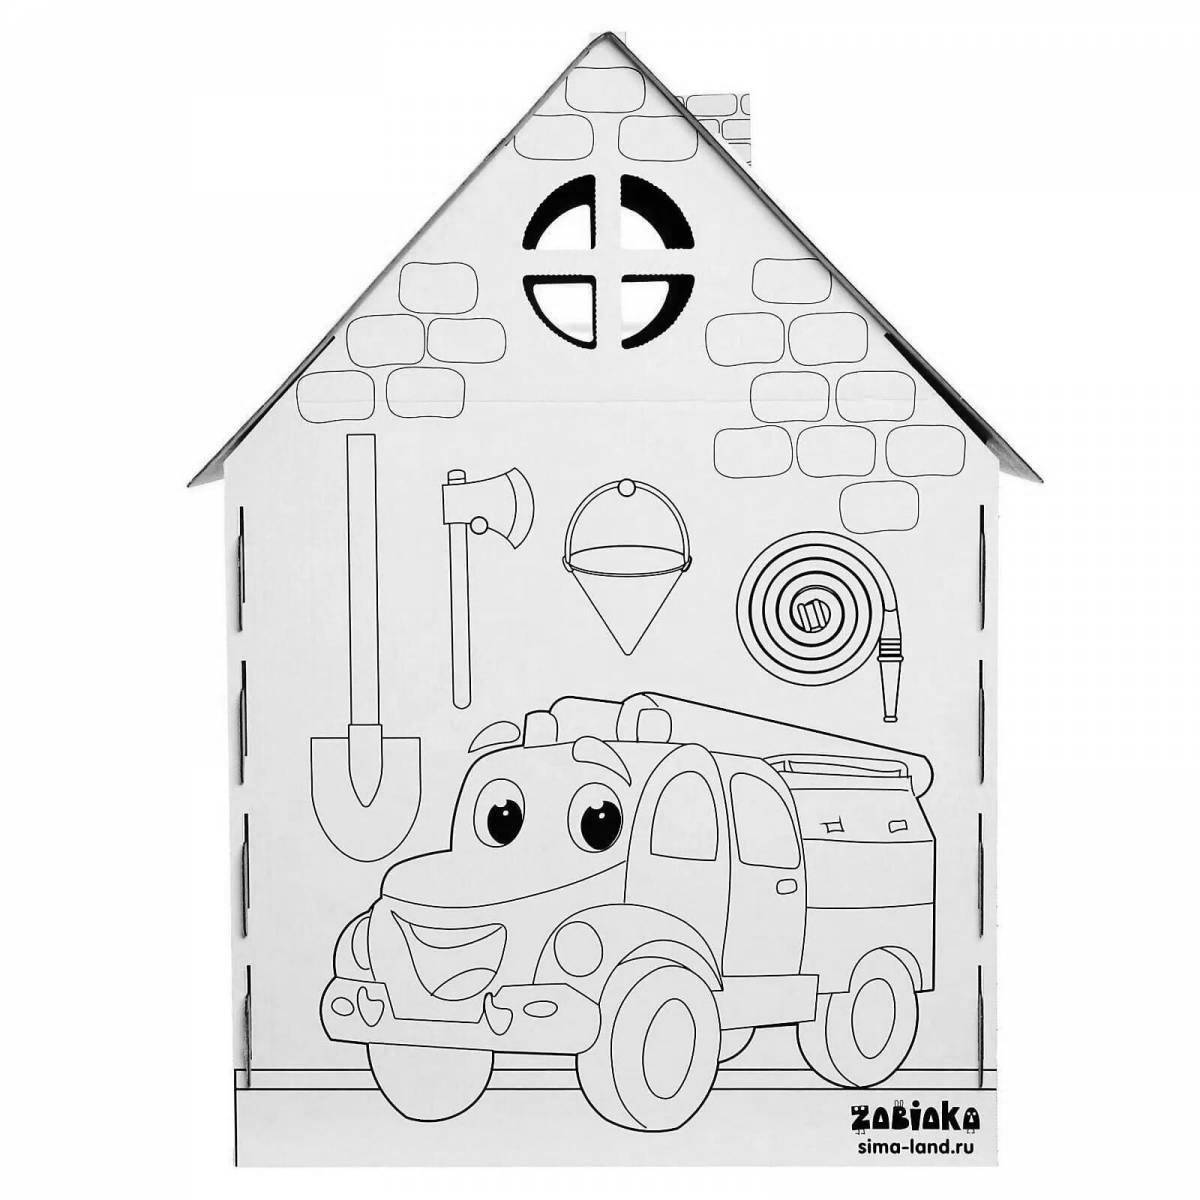 Coloring book price of a sparkling cardboard house